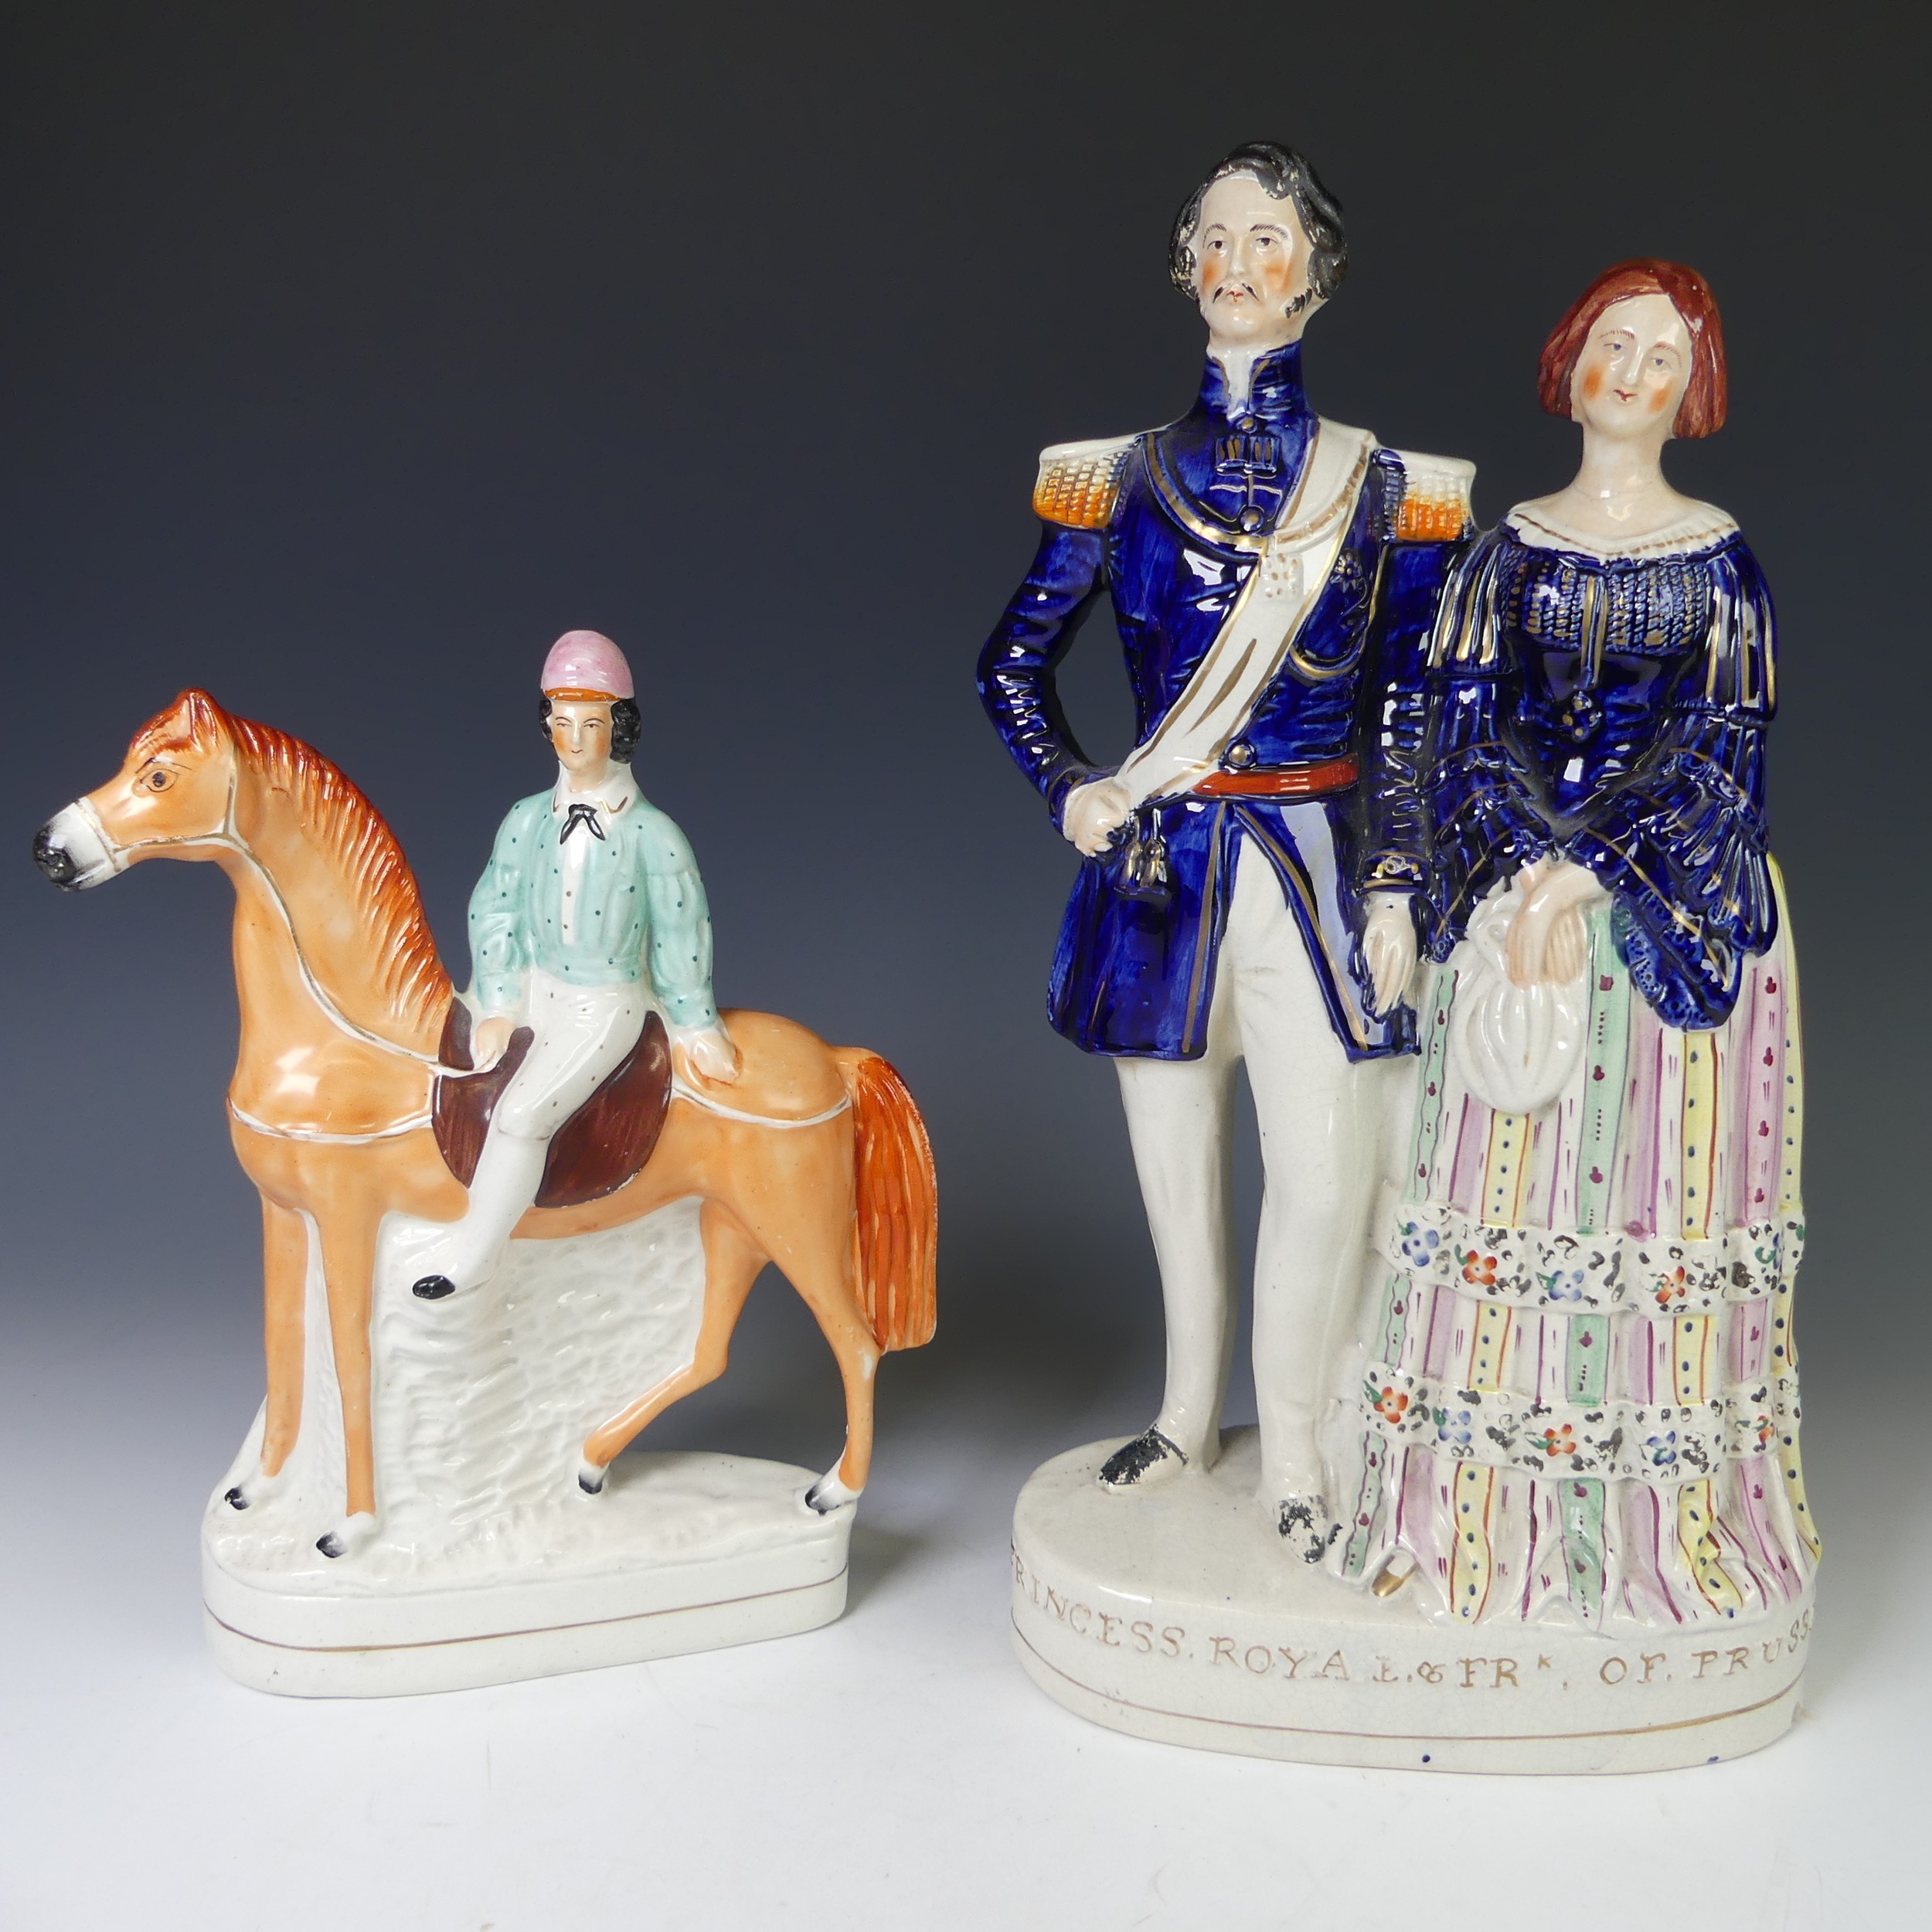 An antique Staffordshire pottery figure of a Jockey on Horseback, the rider with pink hat and blue